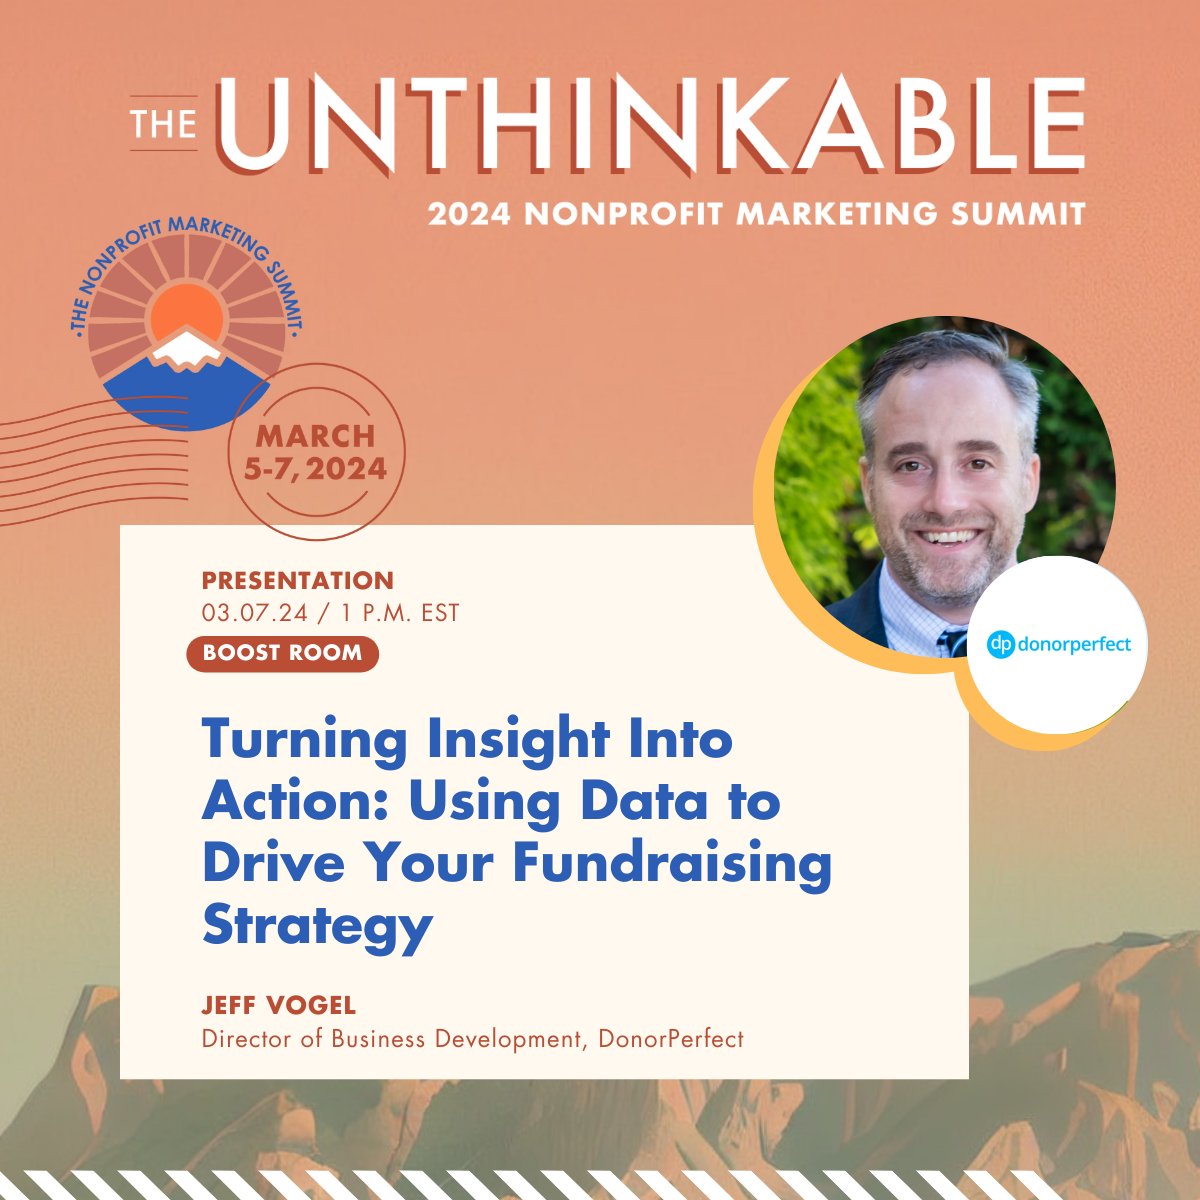 Join us at #NMS2024 hosted by @communityboost on March 5-7! Don't miss Jeff Vogel's presentation on using data for impactful fundraising. 🚀 Connect with 25,000+ nonprofit pros at this free virtual event. Register now: bit.ly/3NJ2Jga